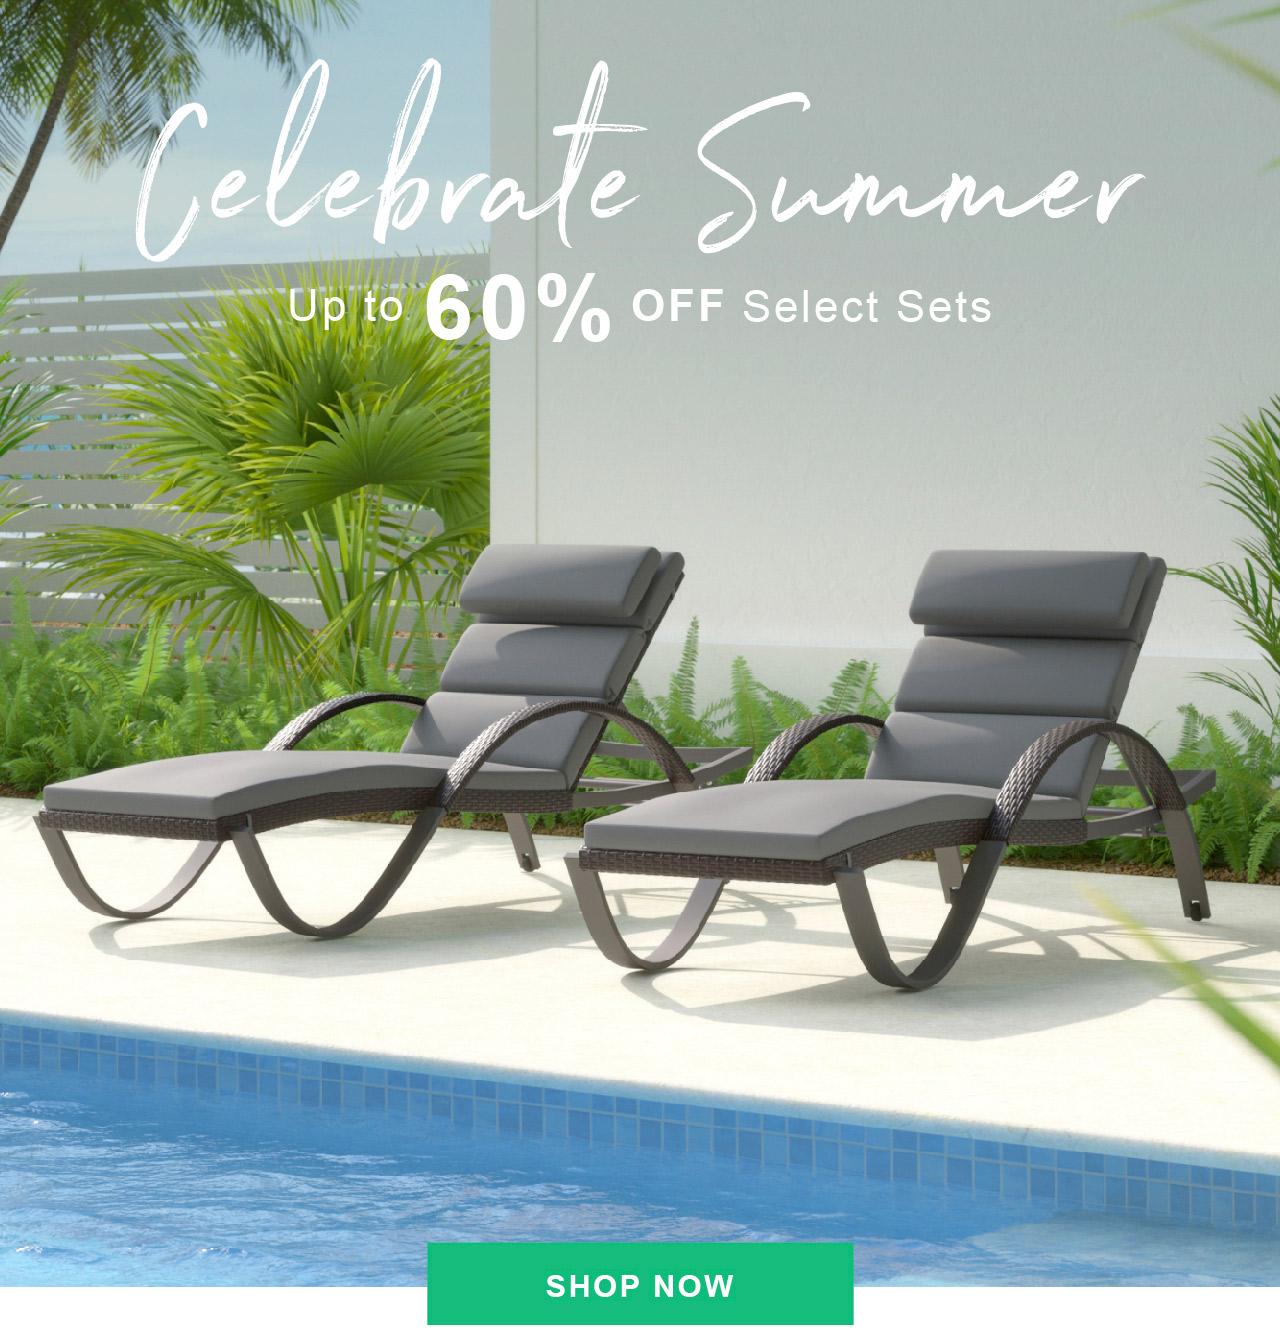 Celebrate Summer! Save up to 60% off select sets, now through June 26 - Shop Now